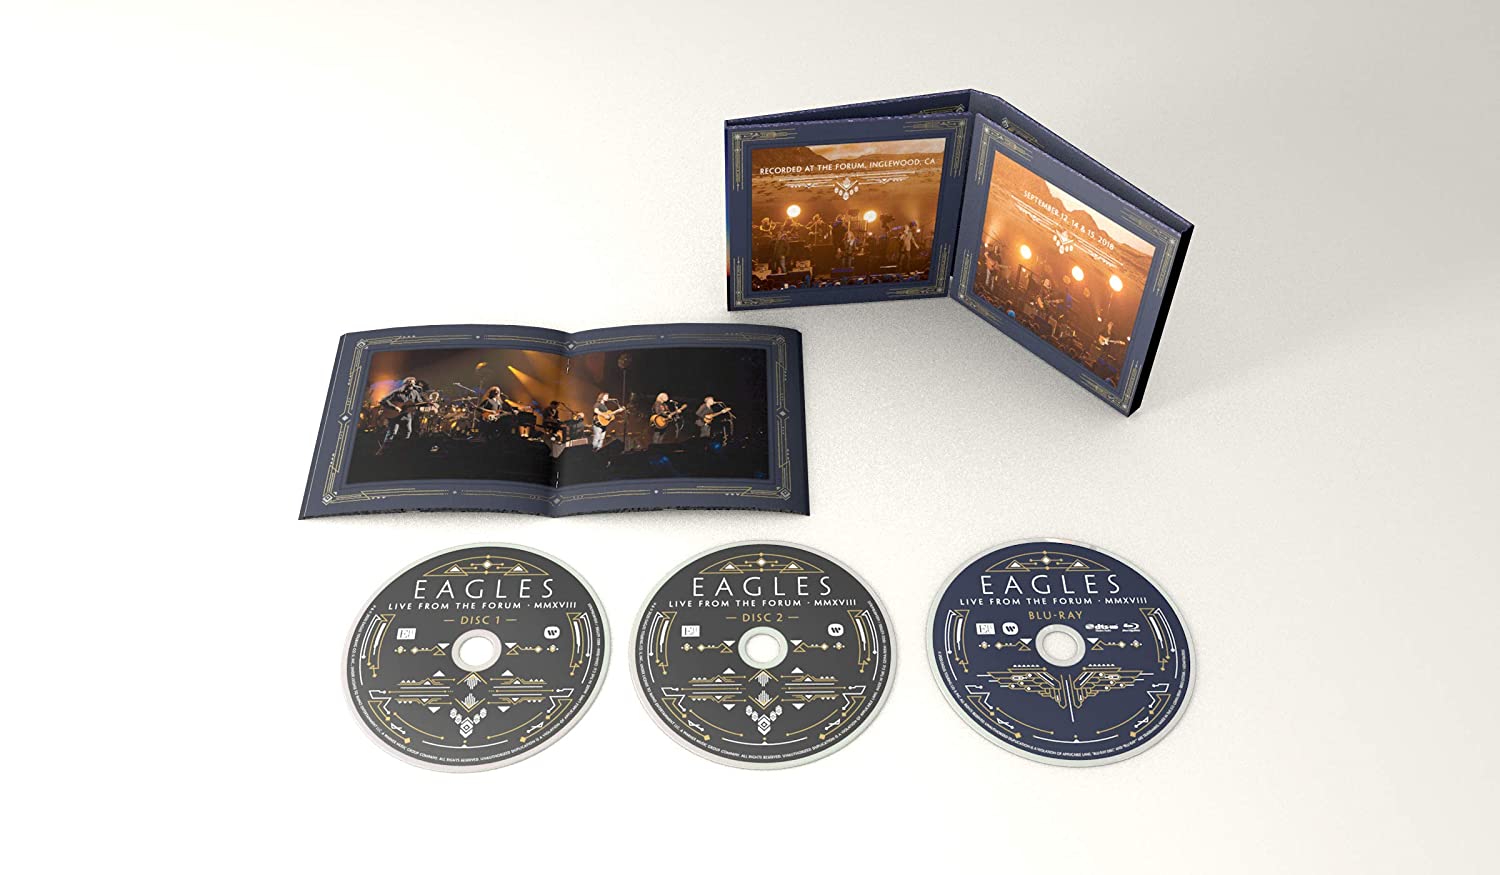 Eagles (이글스) - Live From The Forum MMXVIII [2CD+Blu-ray]